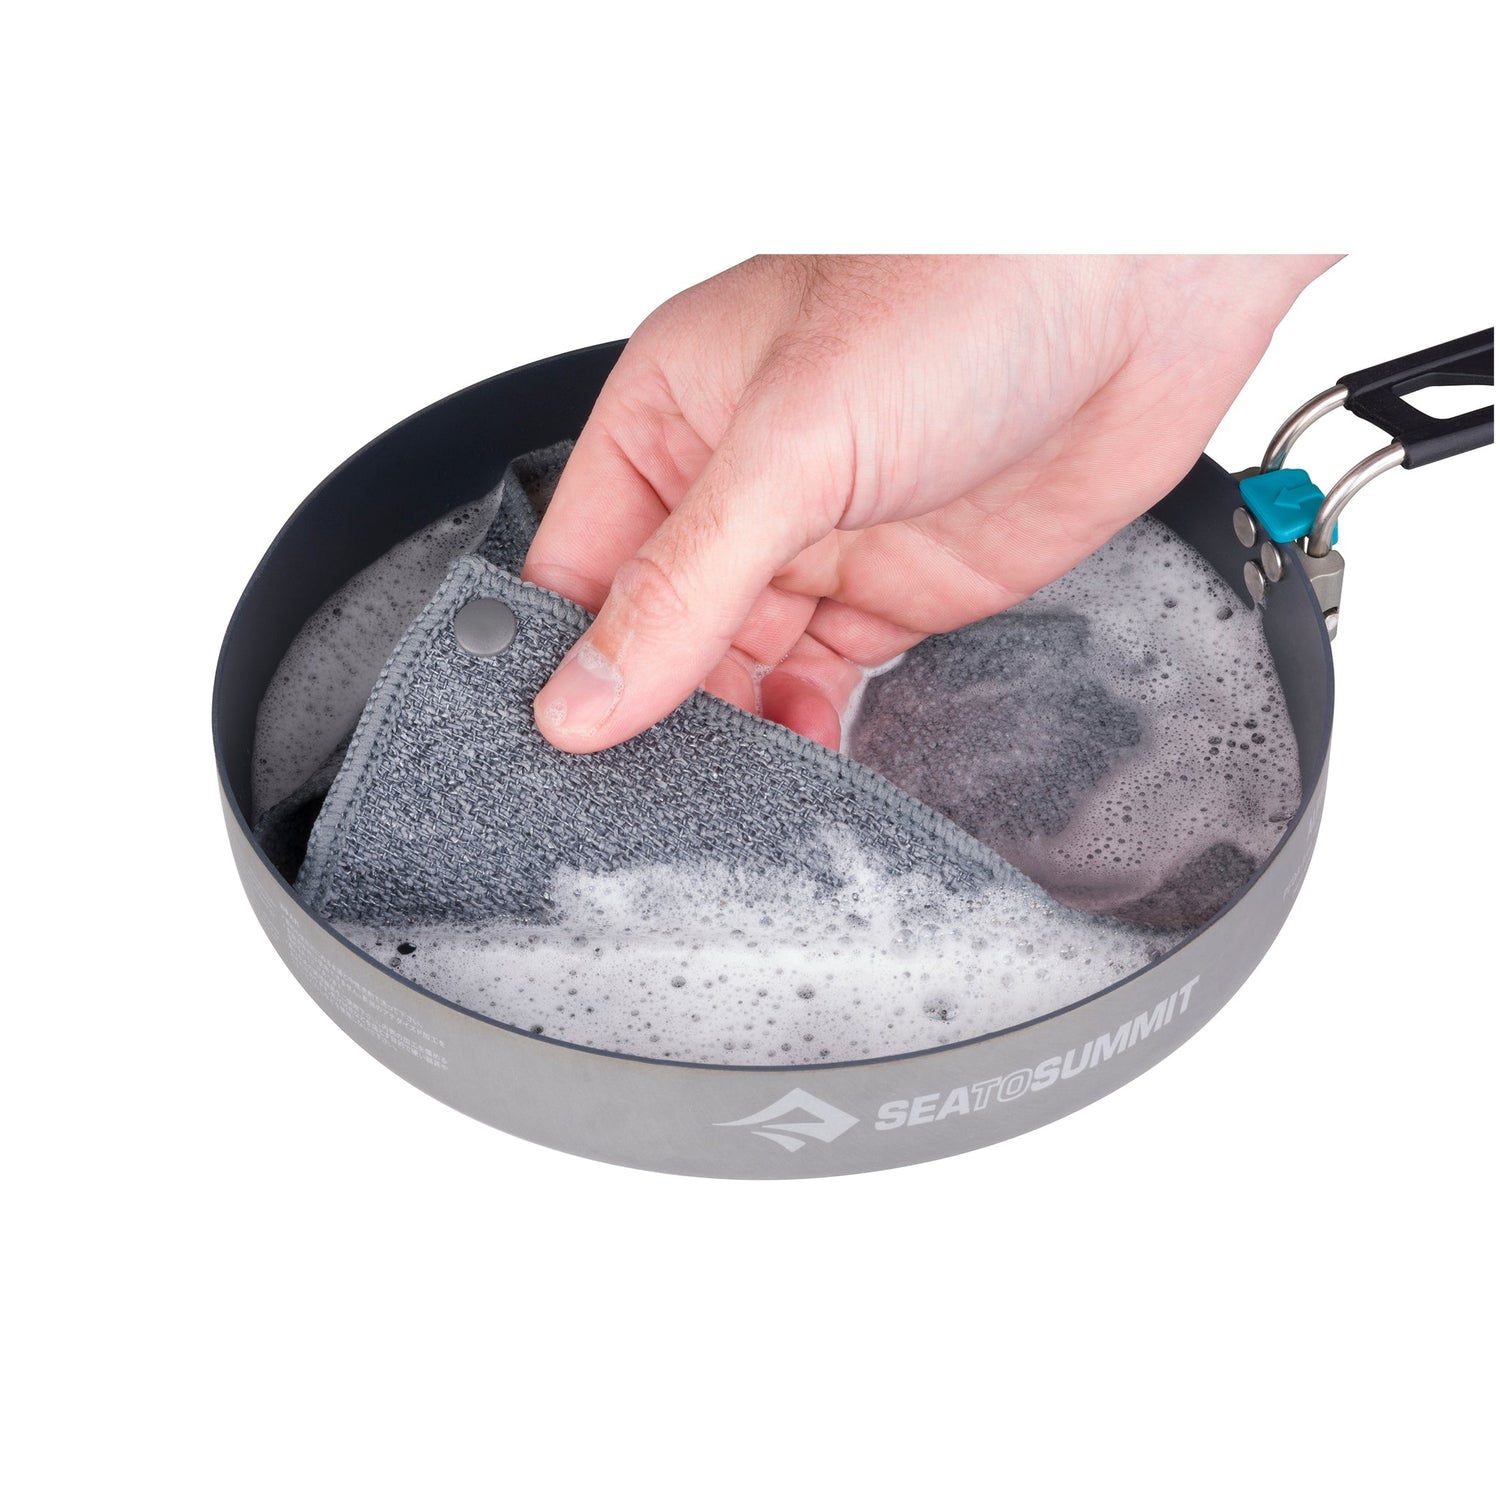 Camp Kitchen Pot Scrubber and Soap